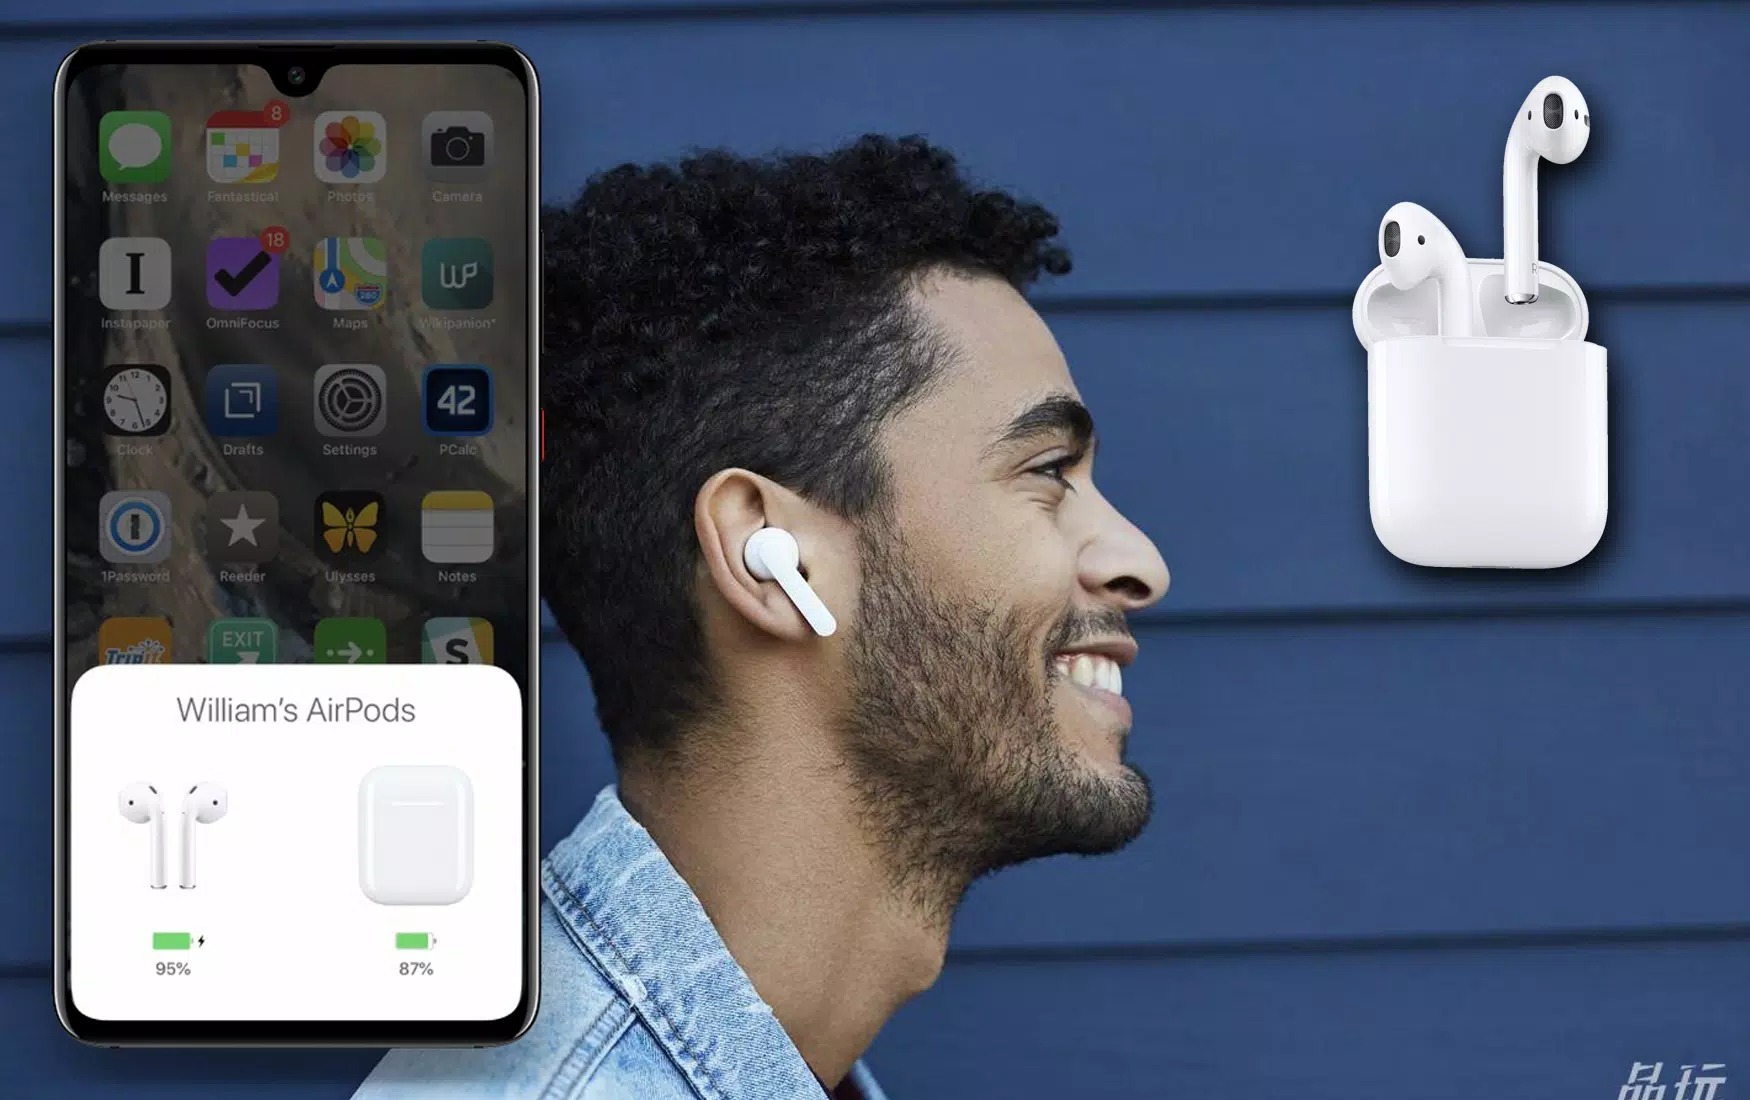 PodsControl - airpod control for iphone for Android - APK Download